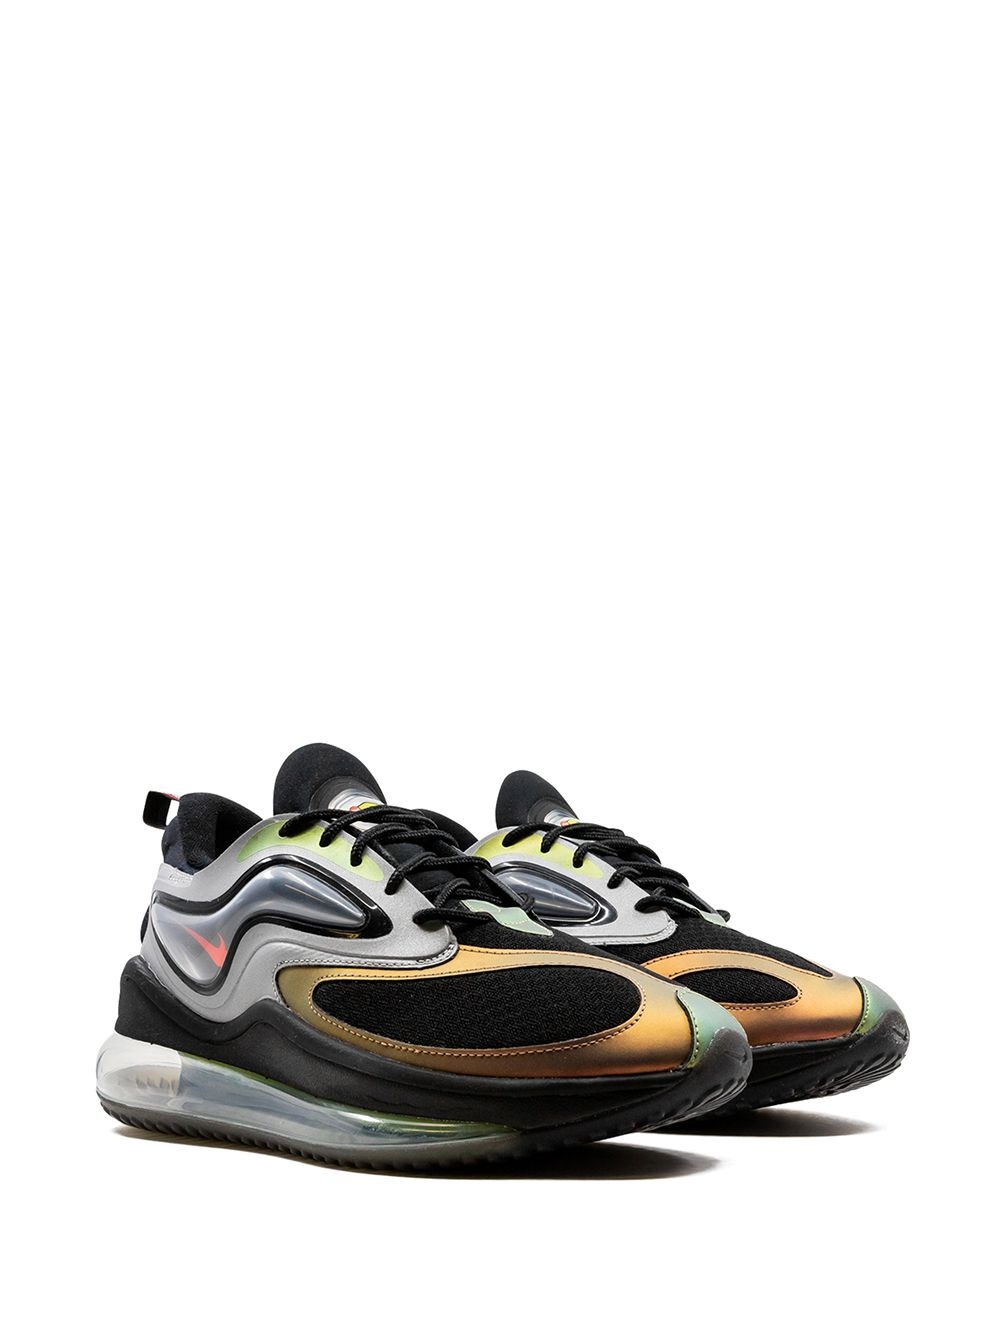 Air Max Zephyr "Evolution Of Icons" sneakers - 2